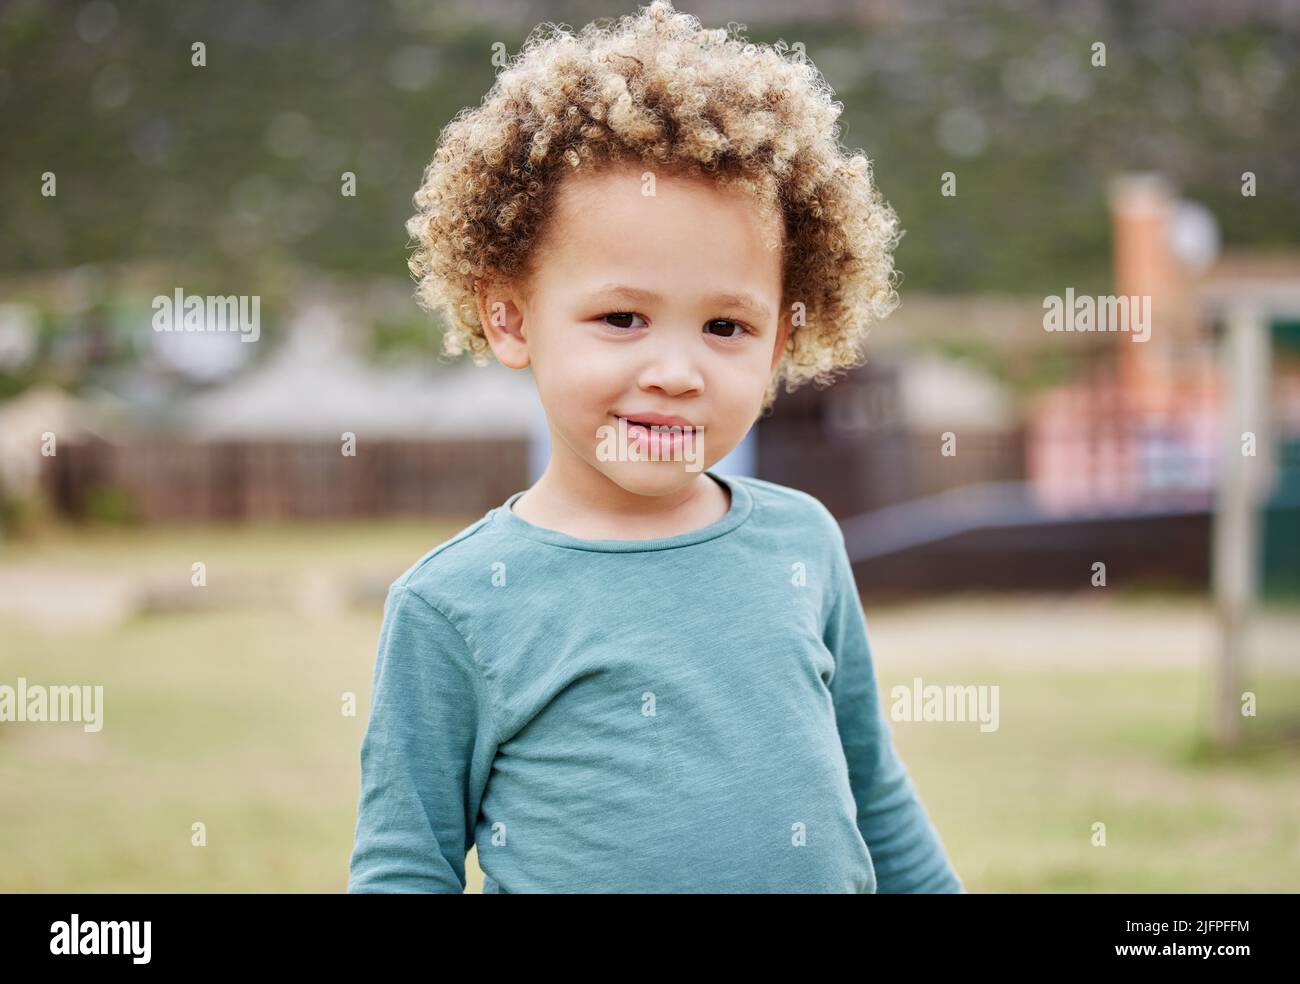 Lets play outside. Shot of an adorable little boy standing outside. Stock Photo